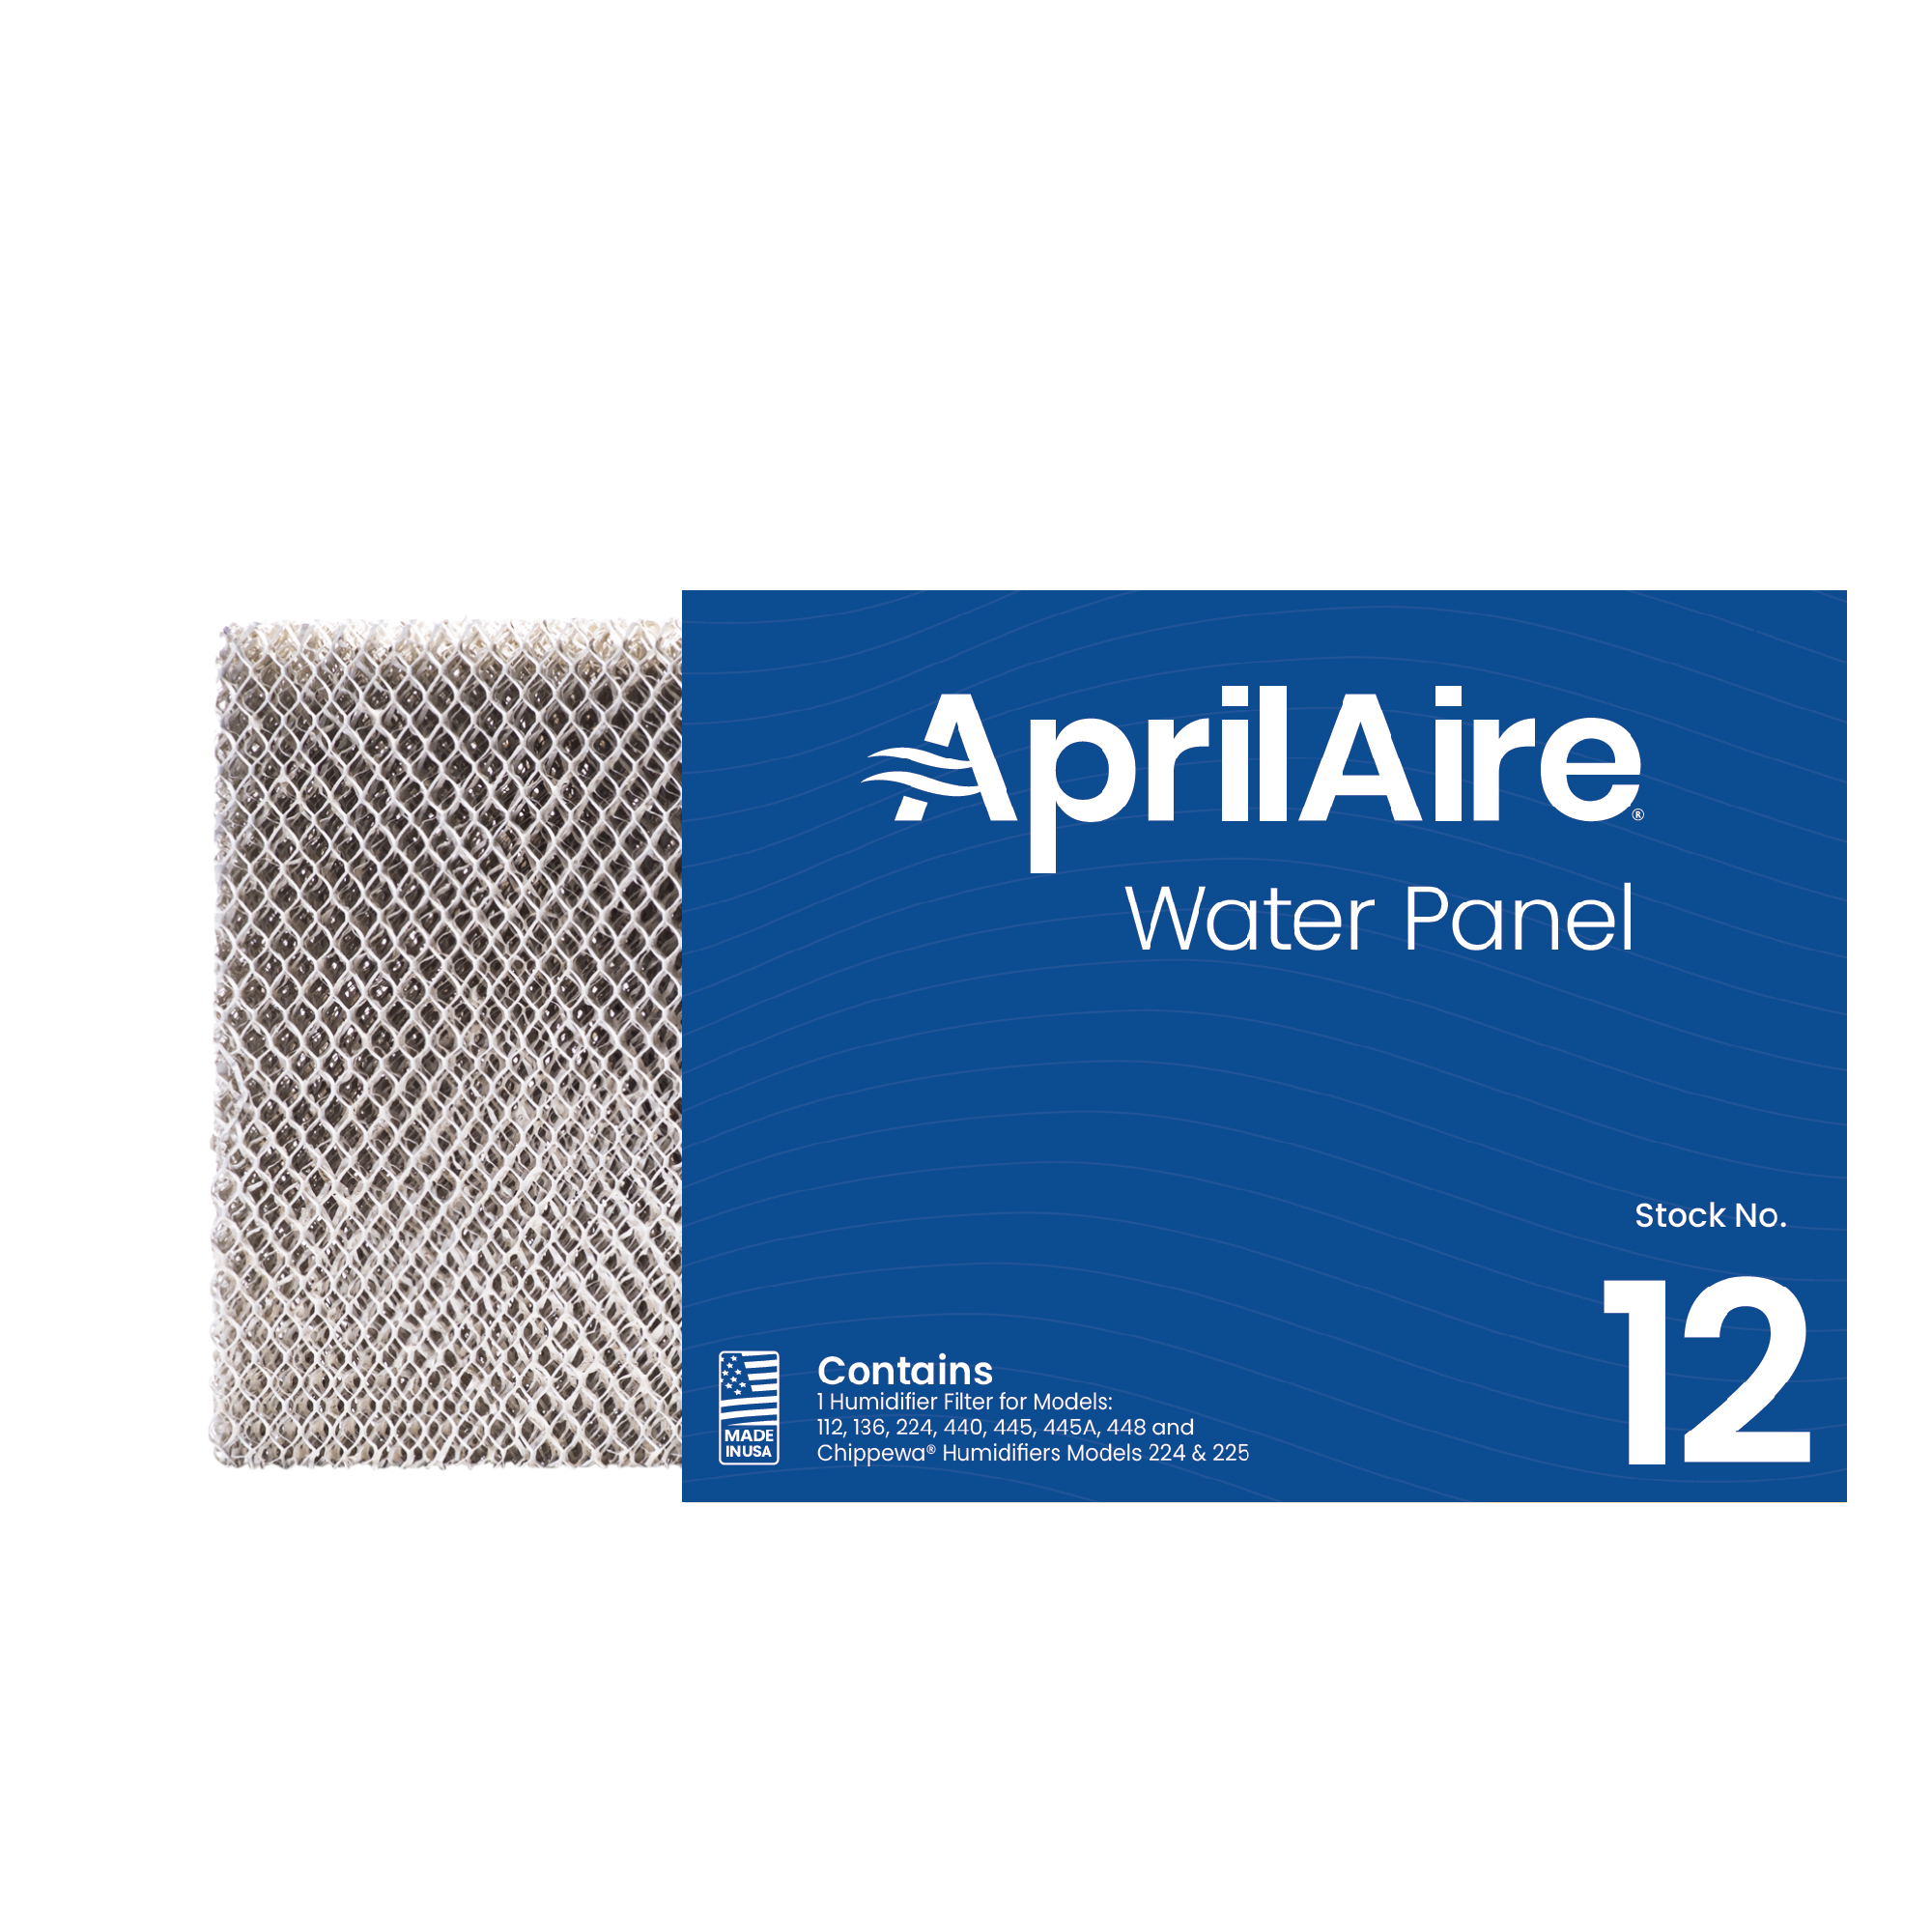 12 Box Water Panel Humidifier Filter Fits Whole House Humidifier 112, 136, 224, 440, 445, 445A, 448